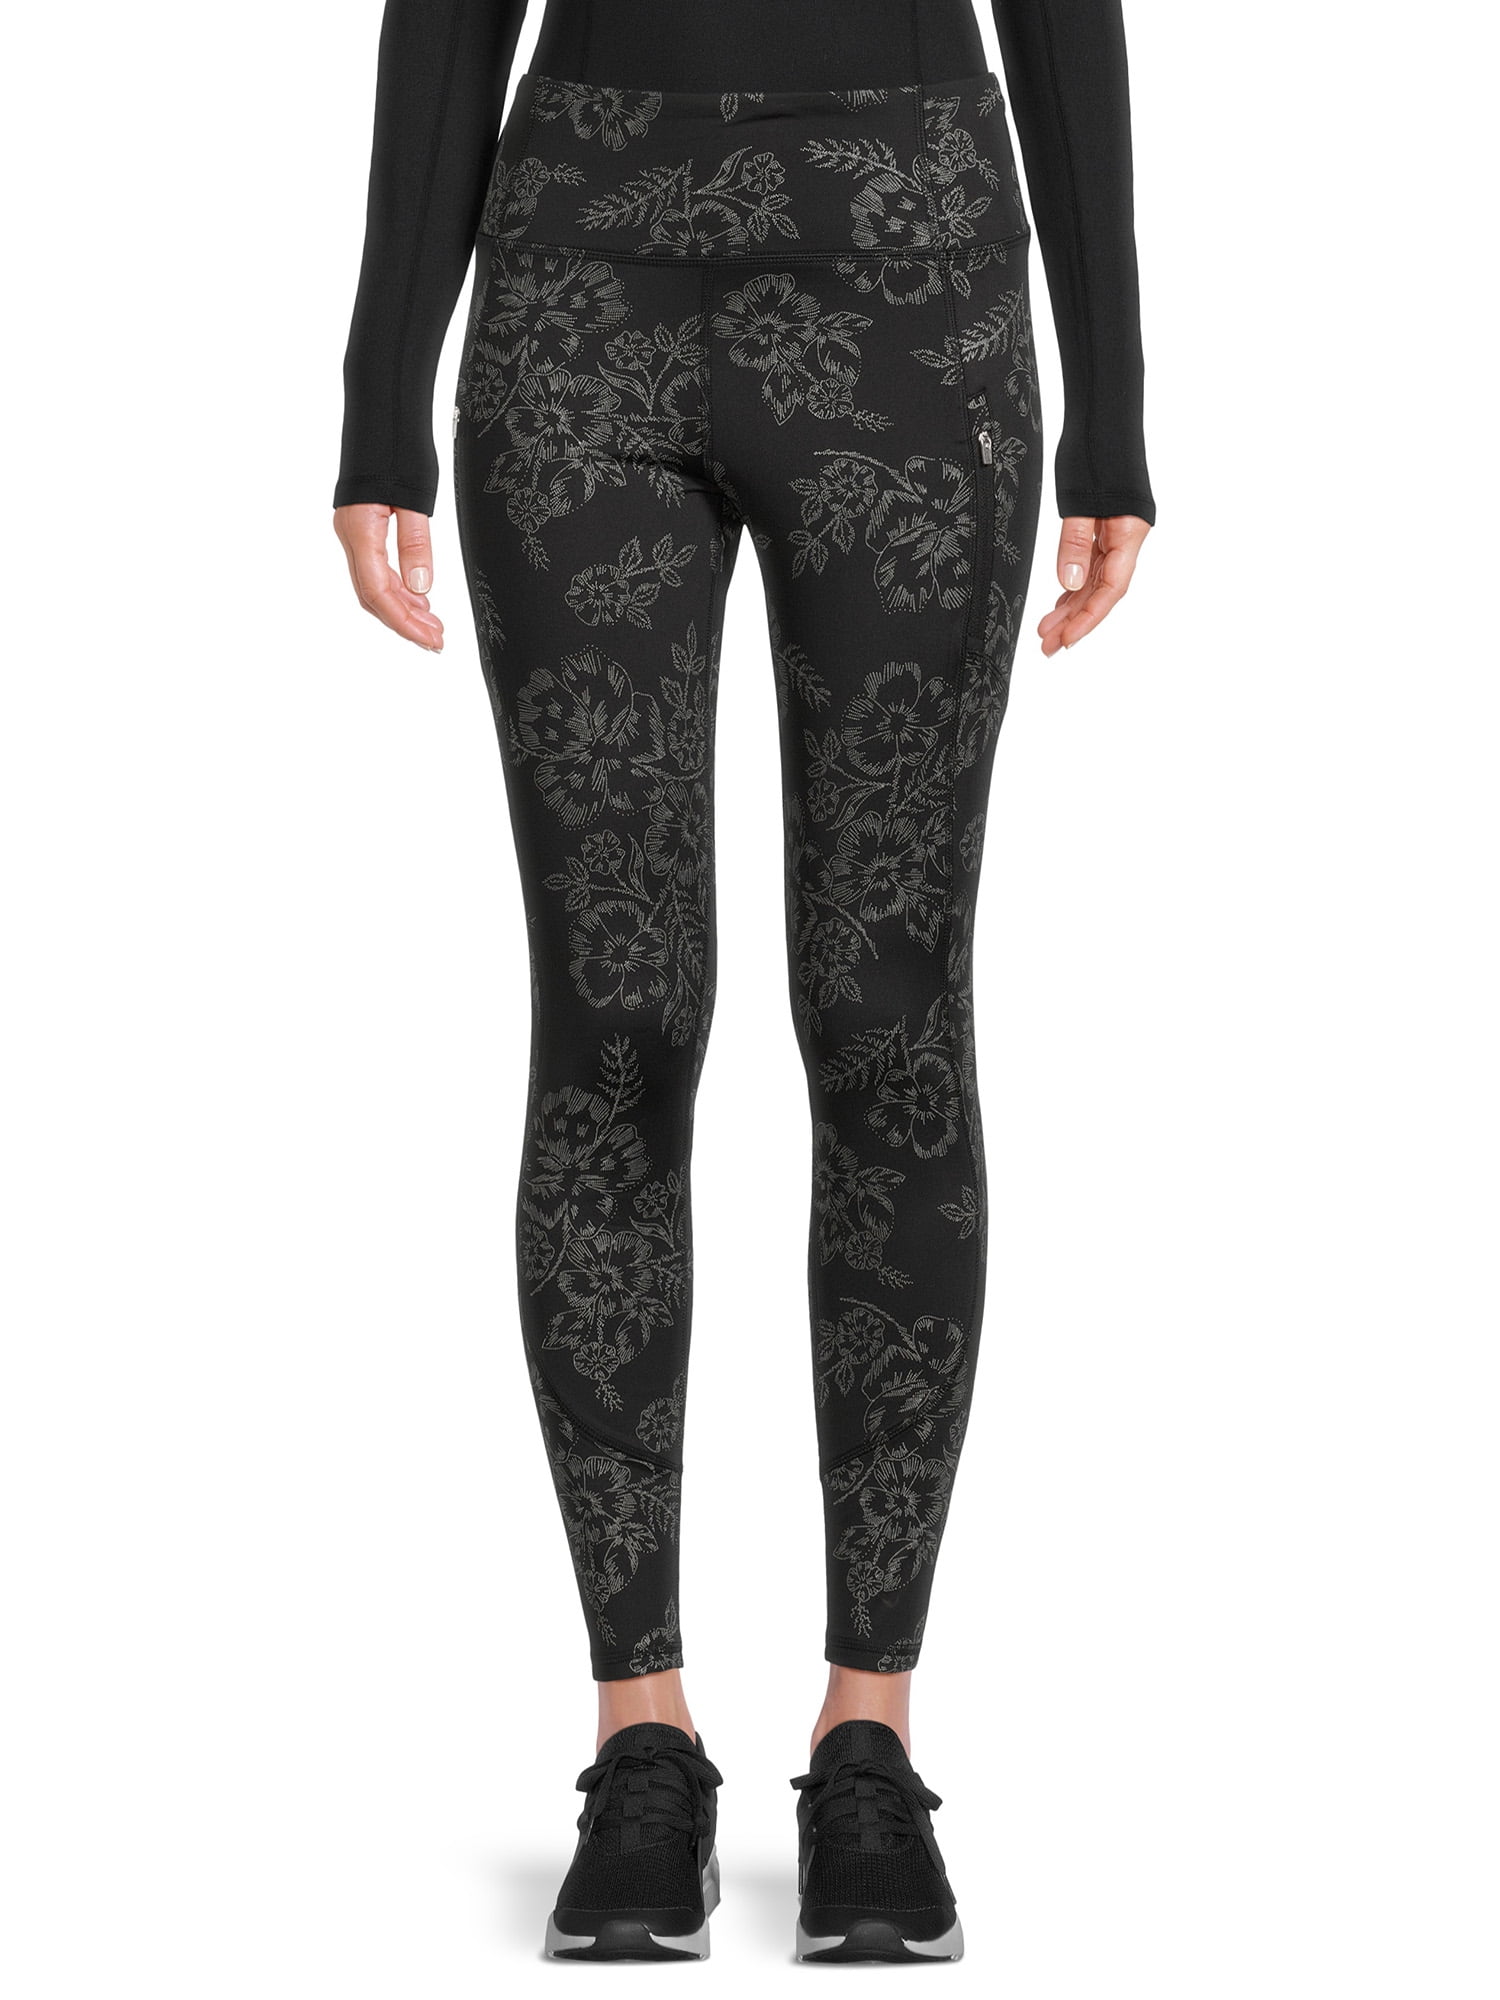 Avia Women's Print Active Leggings with Pockets. Floral Cut Print.Size XL(16-18)